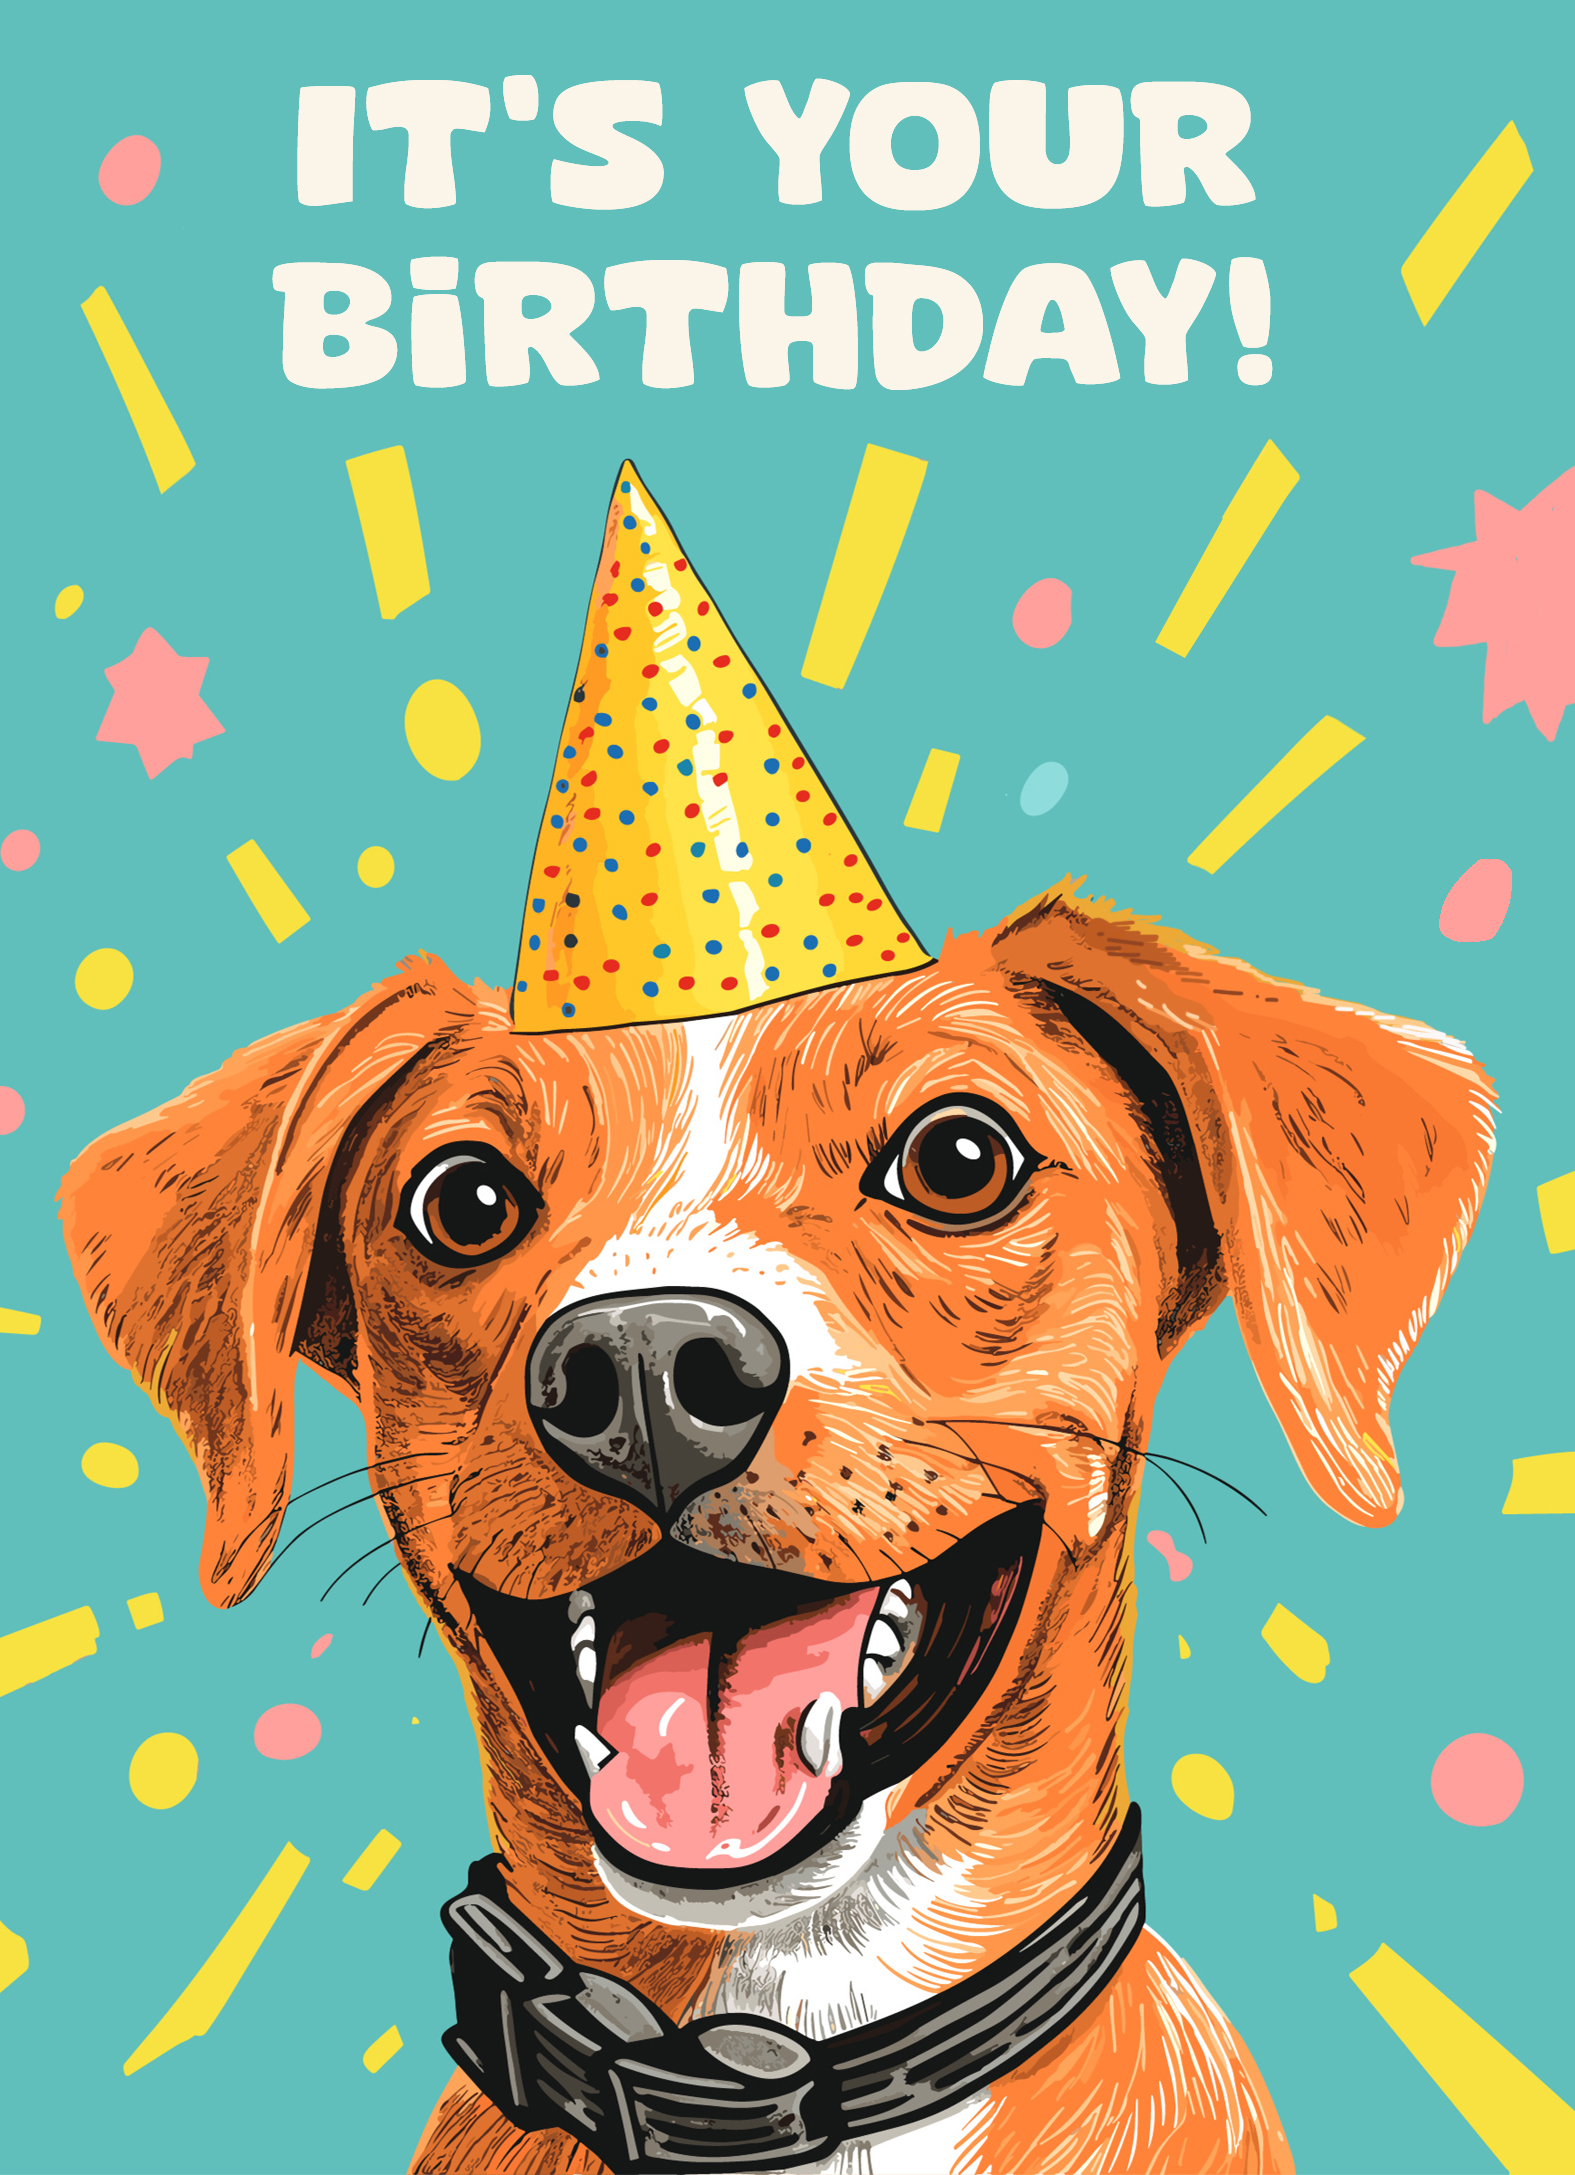 Your Birthday Dog Funny Card Cover